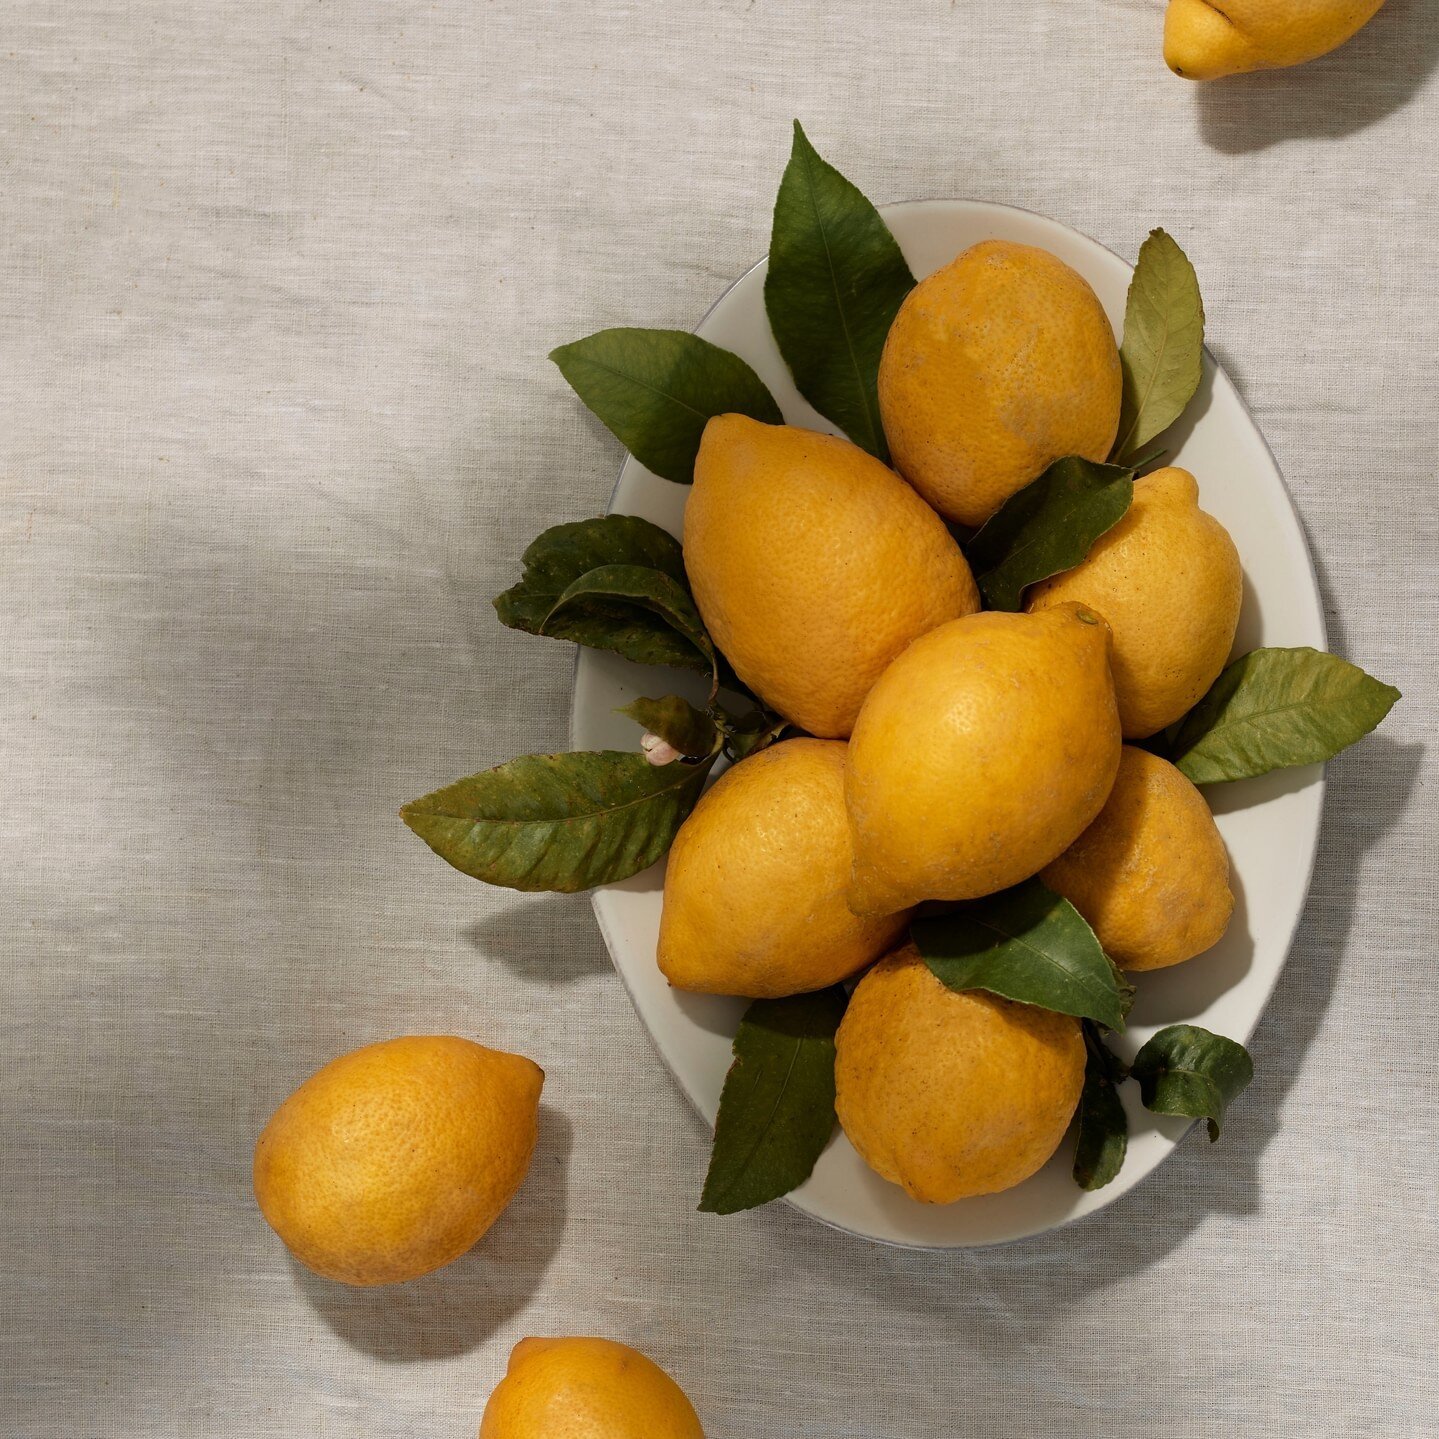 The Algarve is known for its abundant sunshine and stunning beaches, but did you know it's also home to some of the most flavourful lemons? Our dishes are infused with the zesty taste of locally grown lemons, adding a touch of sunshine to every bite.